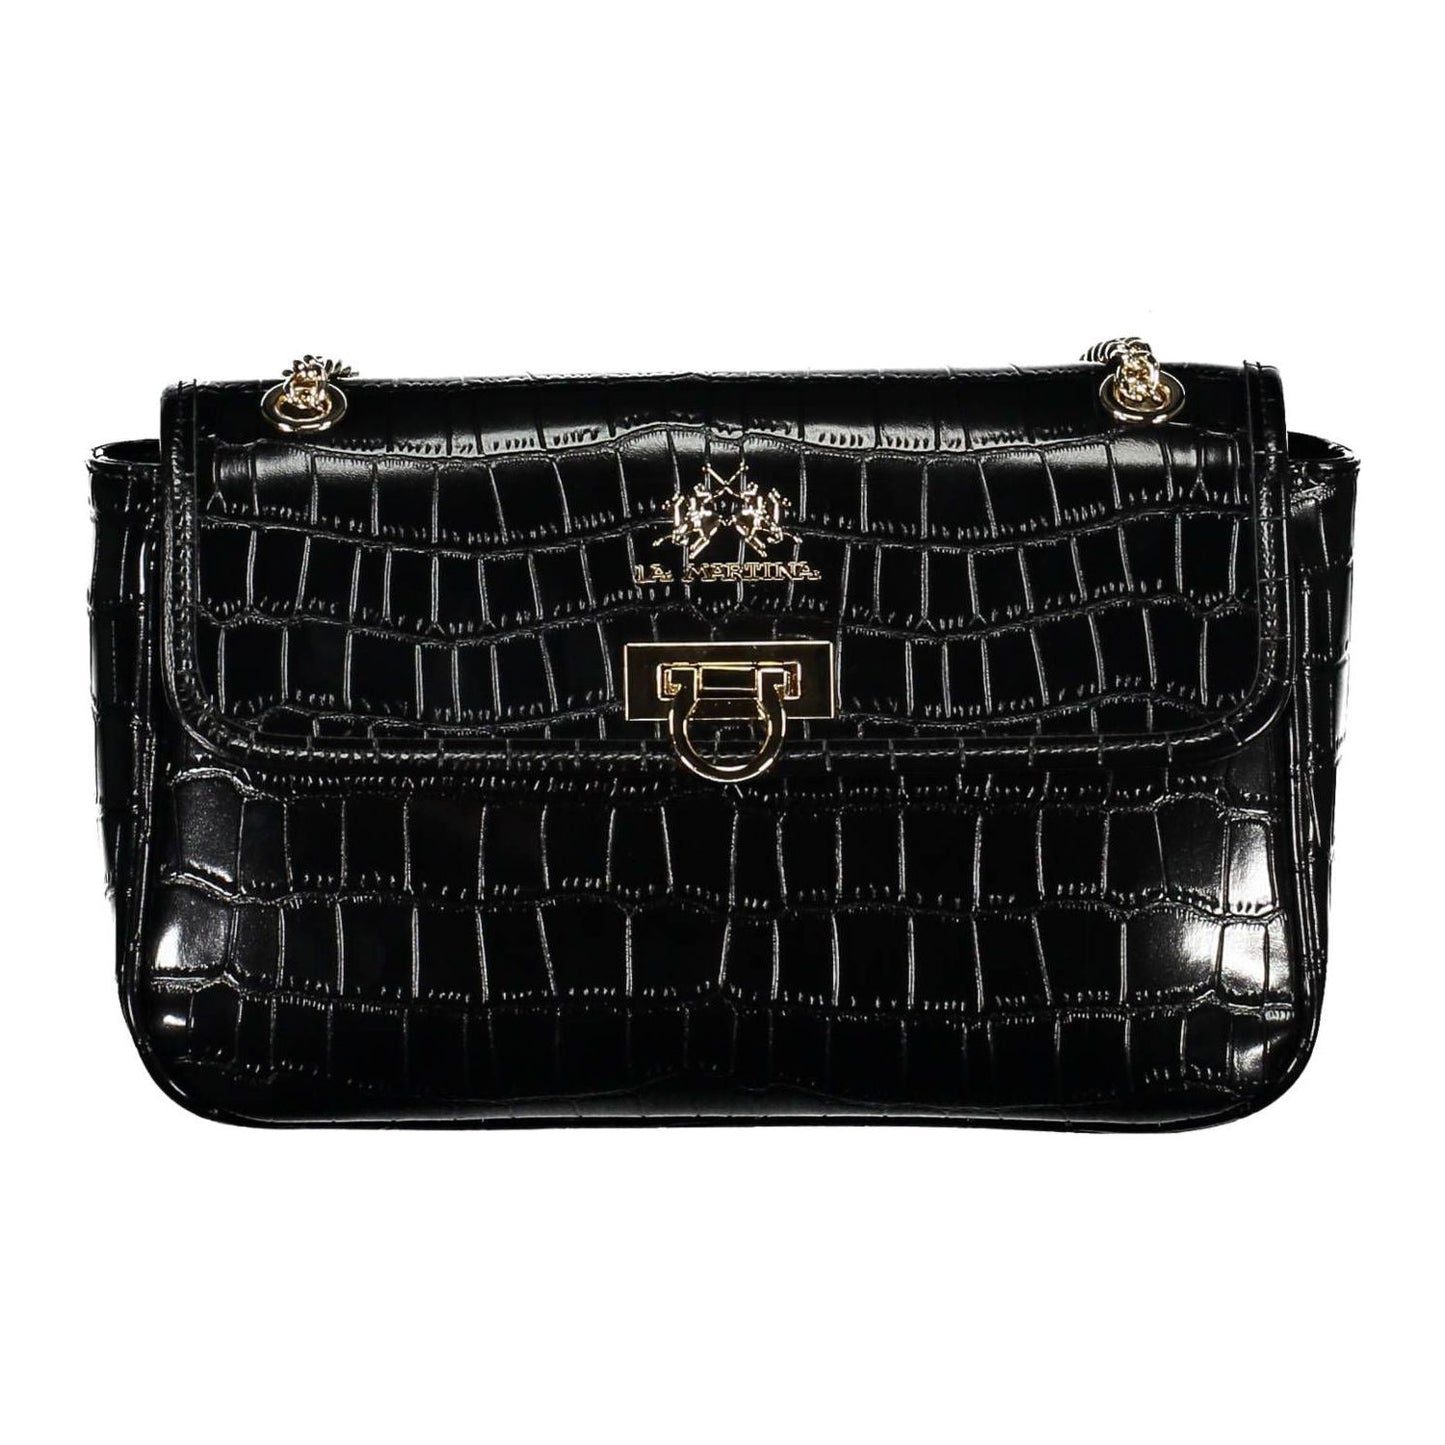 Elegant Chain Shoulder Bag with Contrasting Accents